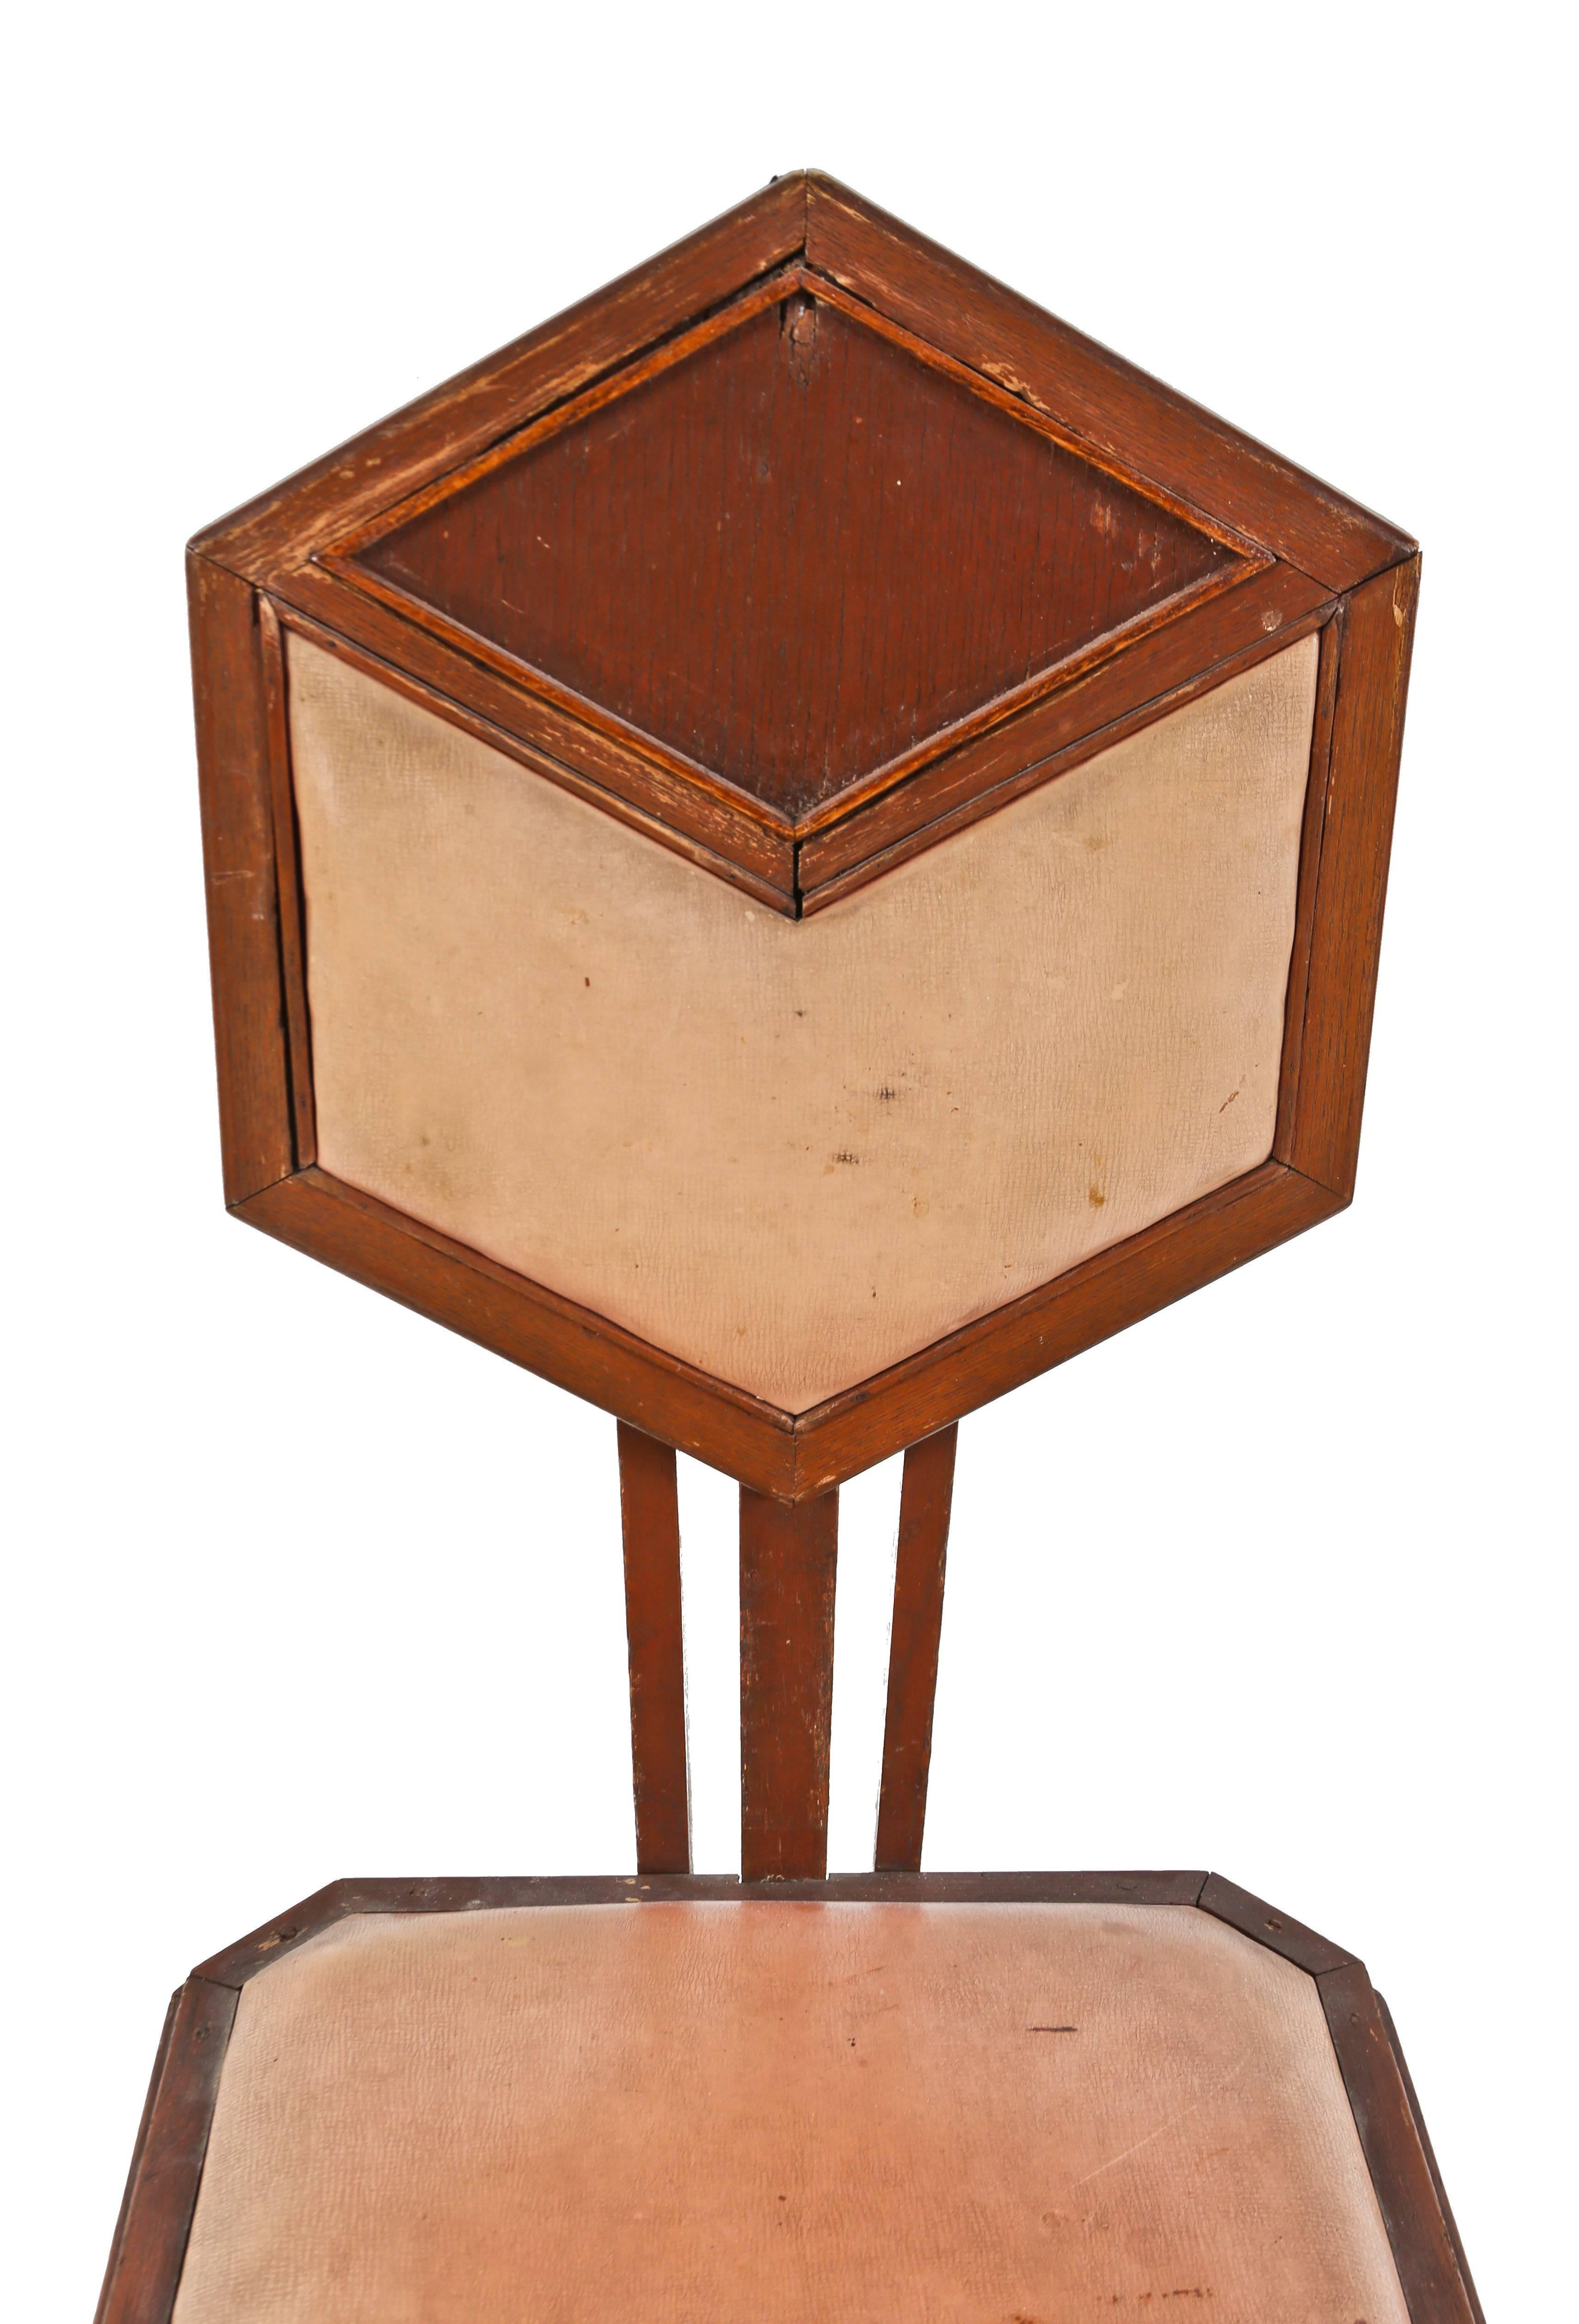 Original museum-quality 20th century American hexagonal-backed side chair salvaged from the imperial hotel (Tokyo, Japan), prior to demolition in the late 1960s. The iconic 